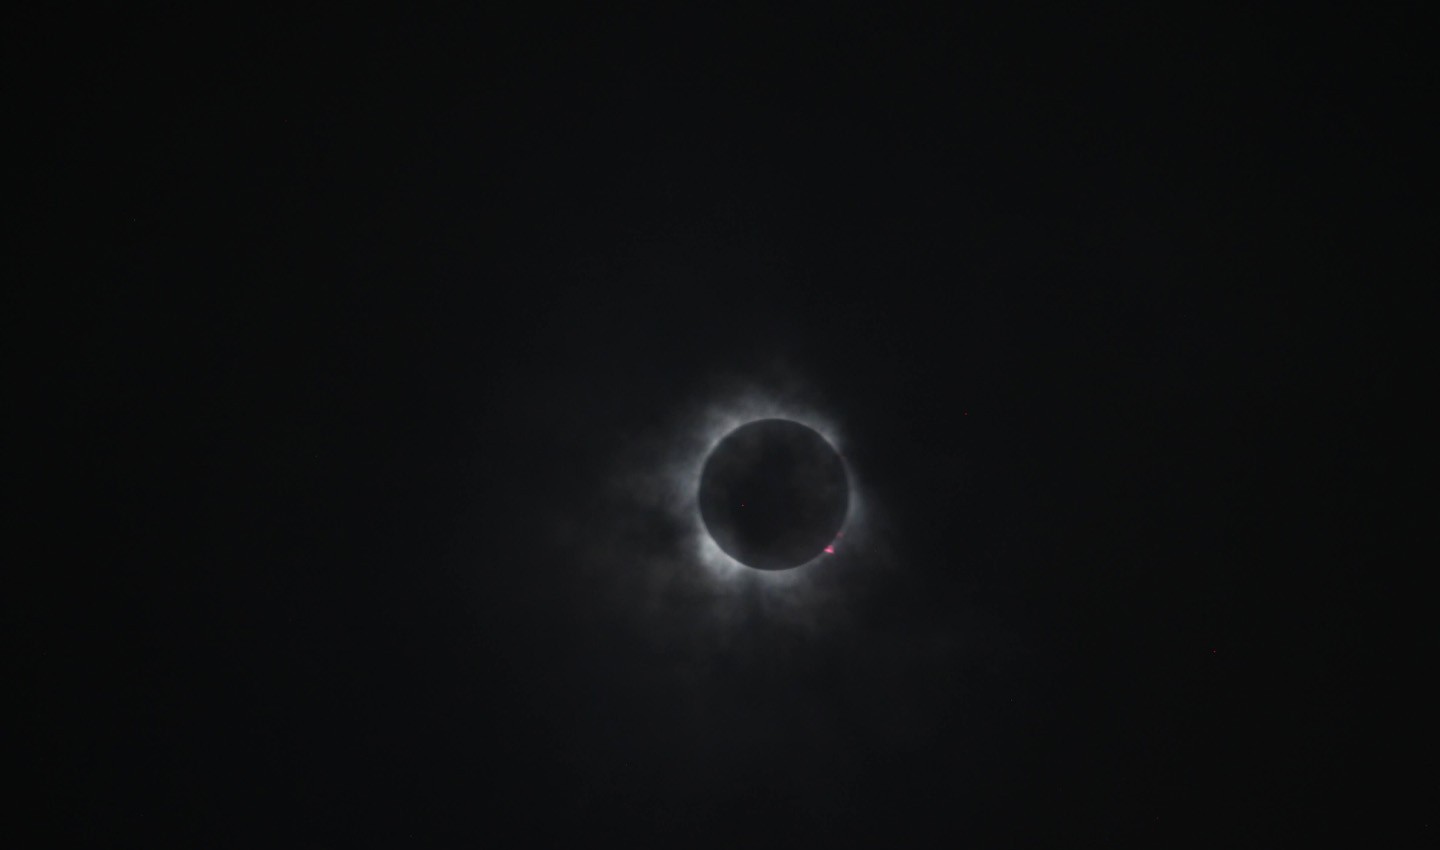 An image of the eclipse